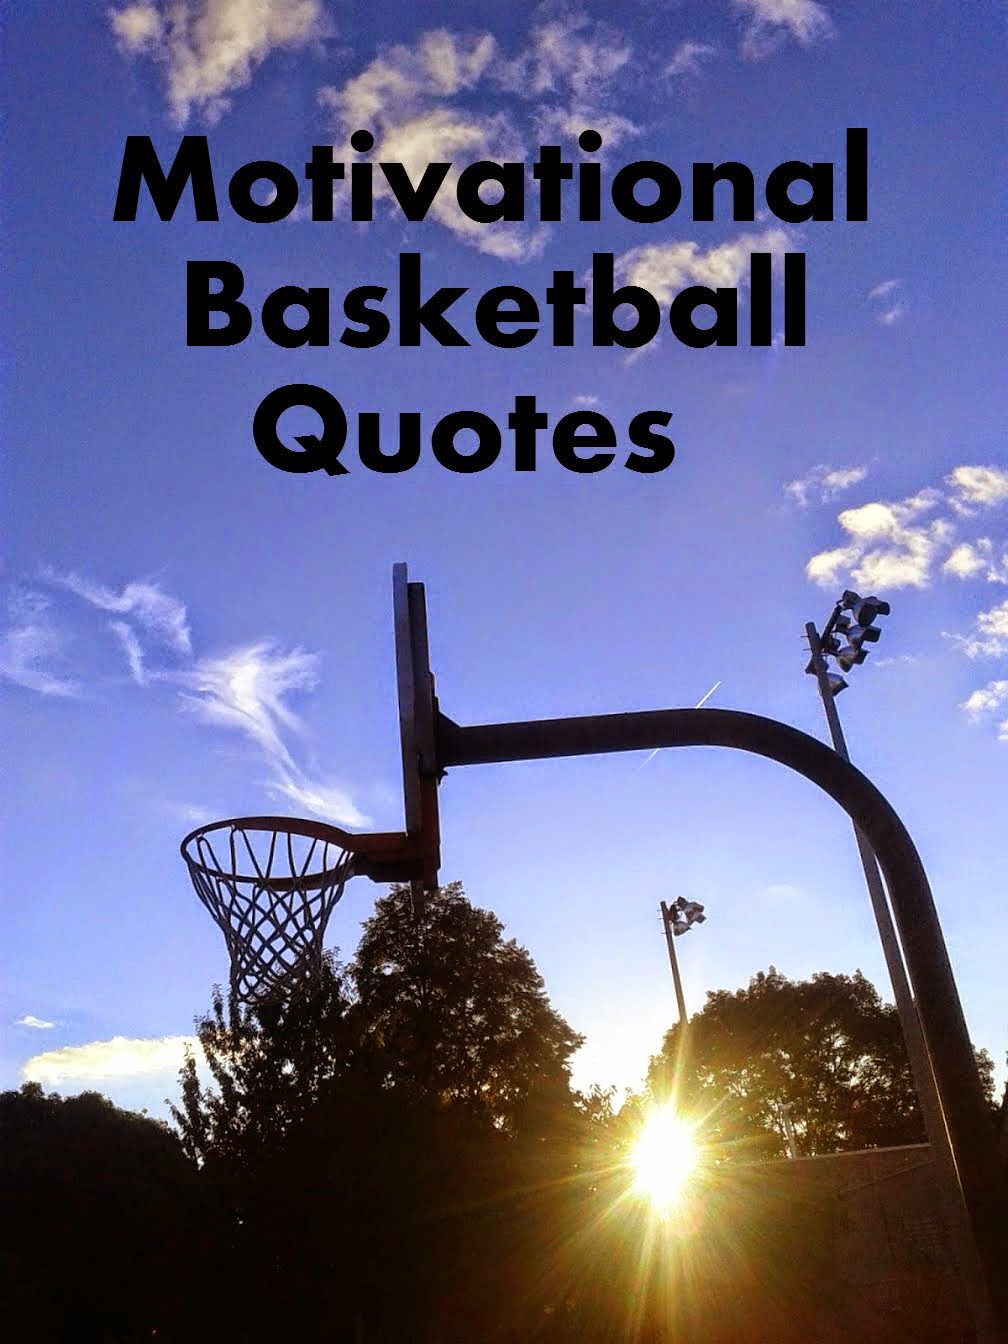 Good Luck Basketball Quotes. QuotesGram